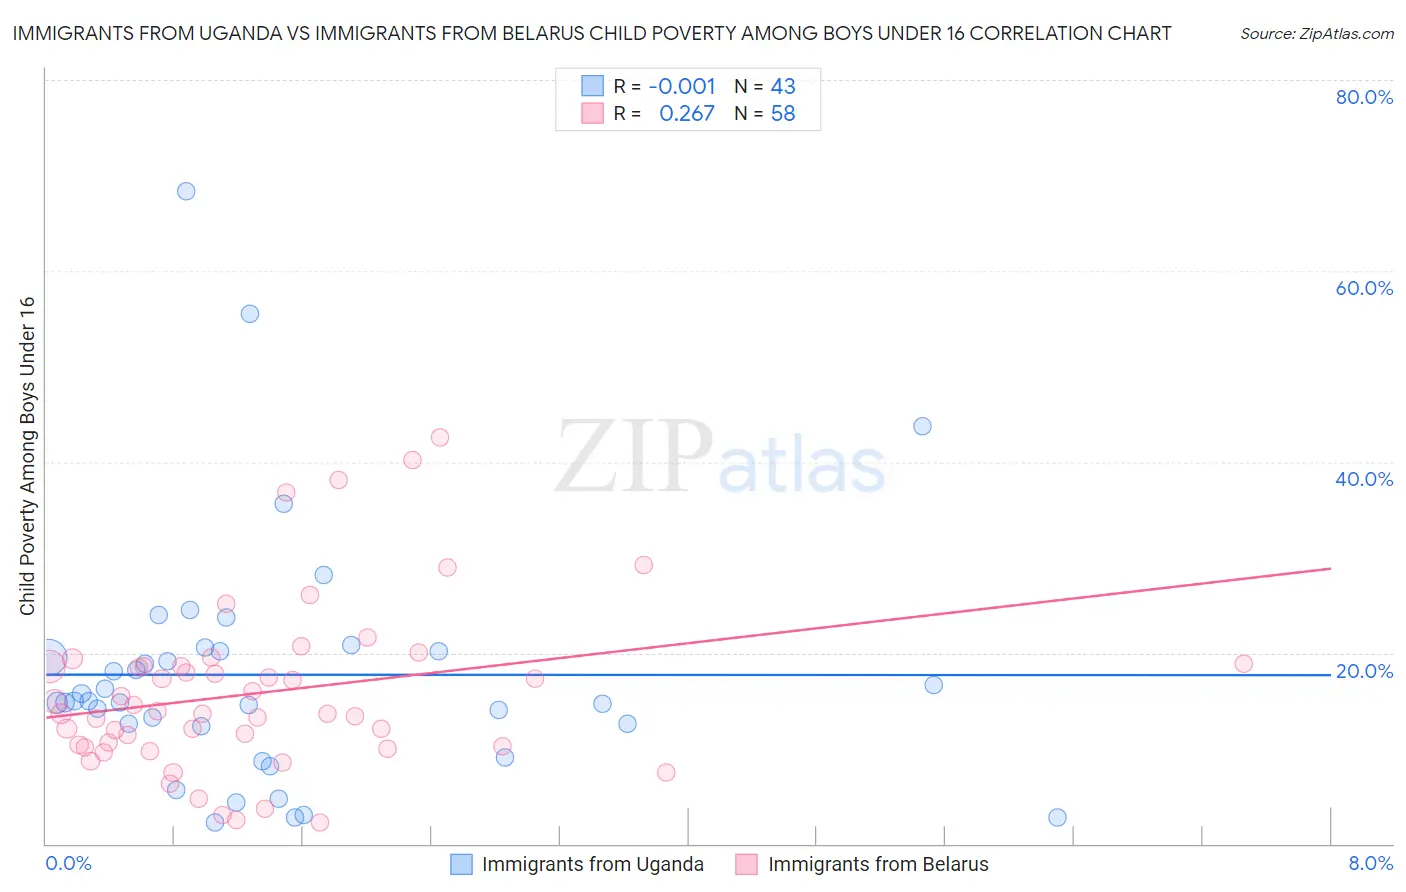 Immigrants from Uganda vs Immigrants from Belarus Child Poverty Among Boys Under 16